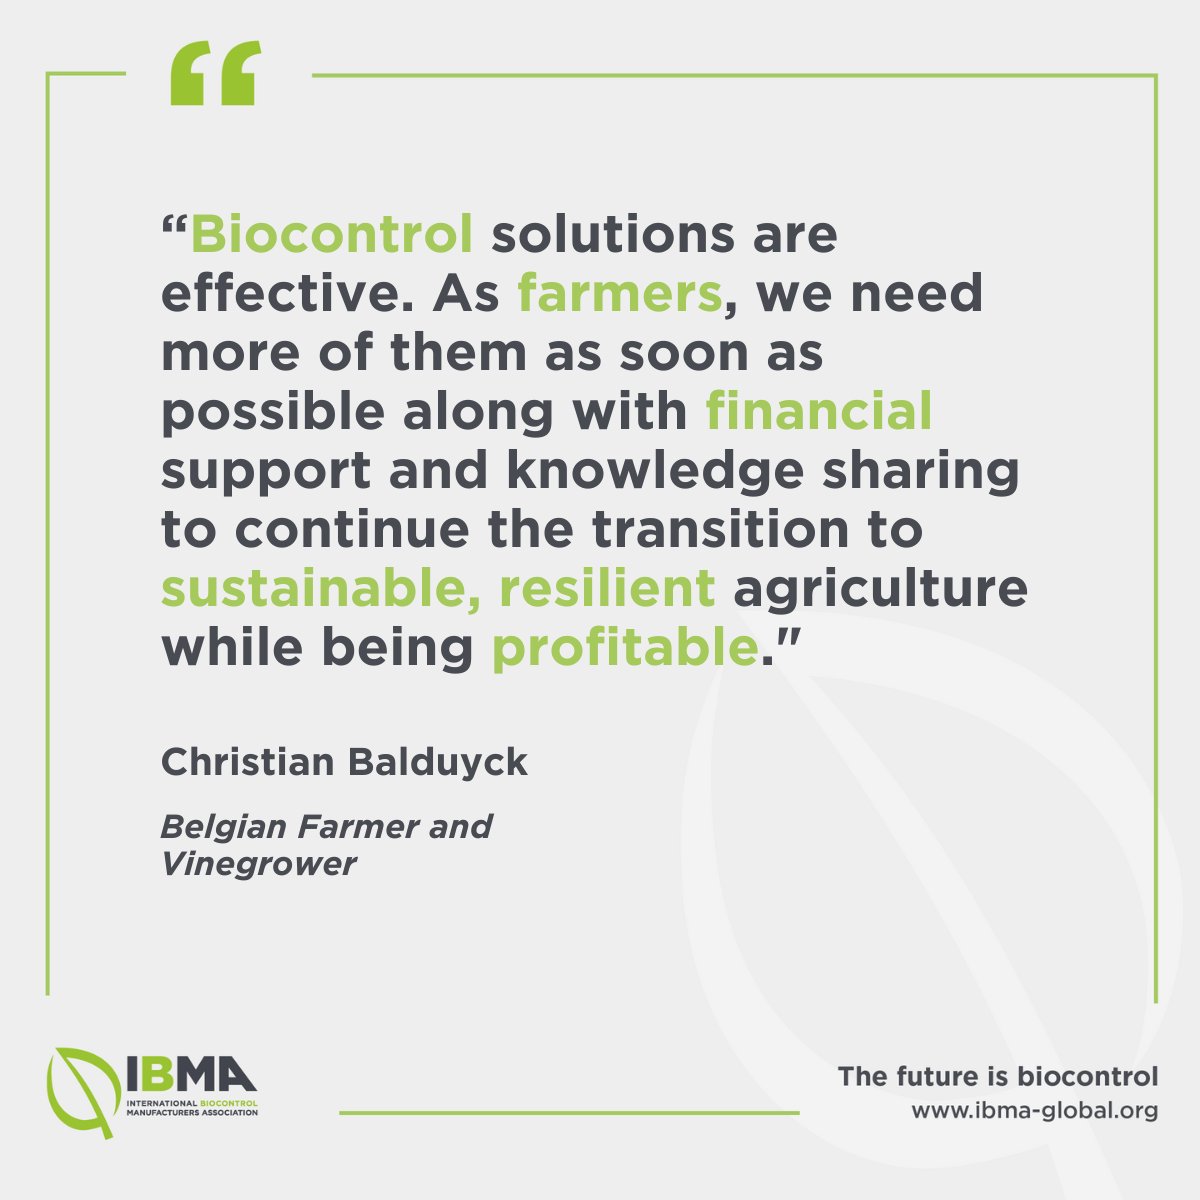 The 'IPM Works' conference hosted by @H2020IPMWorks and @IpmDecisions takes place today! Amongst the impressive speakers, Karel Bolckman from @Biobest_Group and Belgian farmer Christian Balduyck will speak on the crucial role of #biocontrol in Integrated Pest Management.